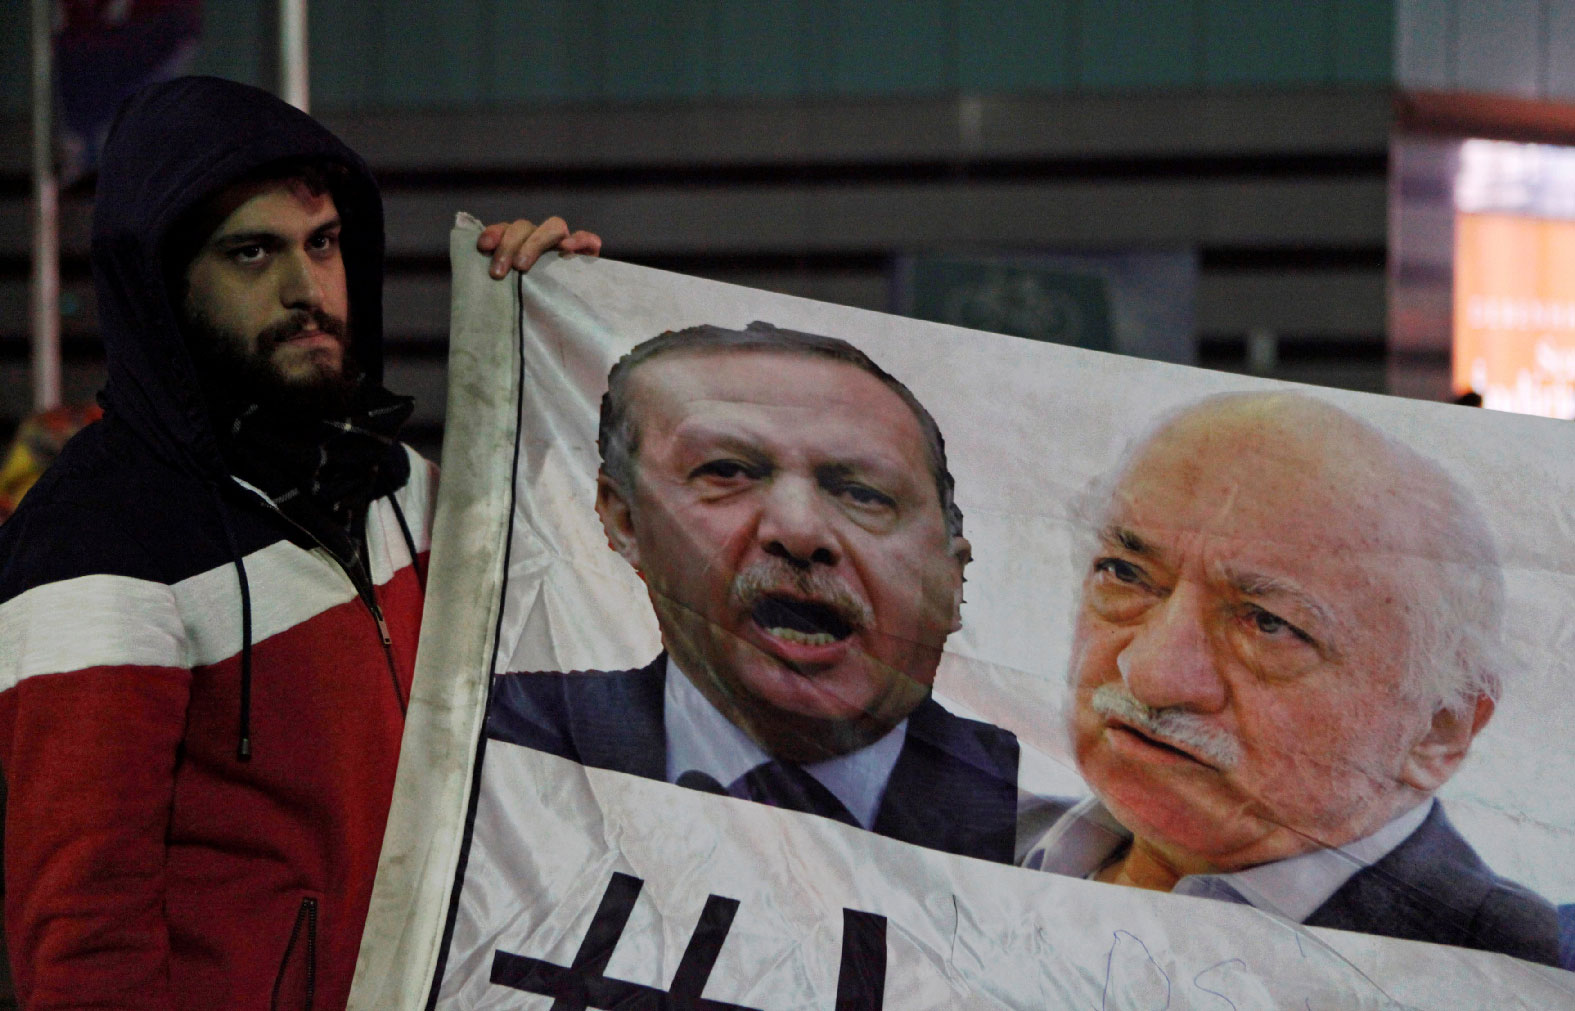 A demonstrator hold pictures of Turkey's Prime Minister Tayyip Erdogan and Turkish cleric Fethullah Gulen.